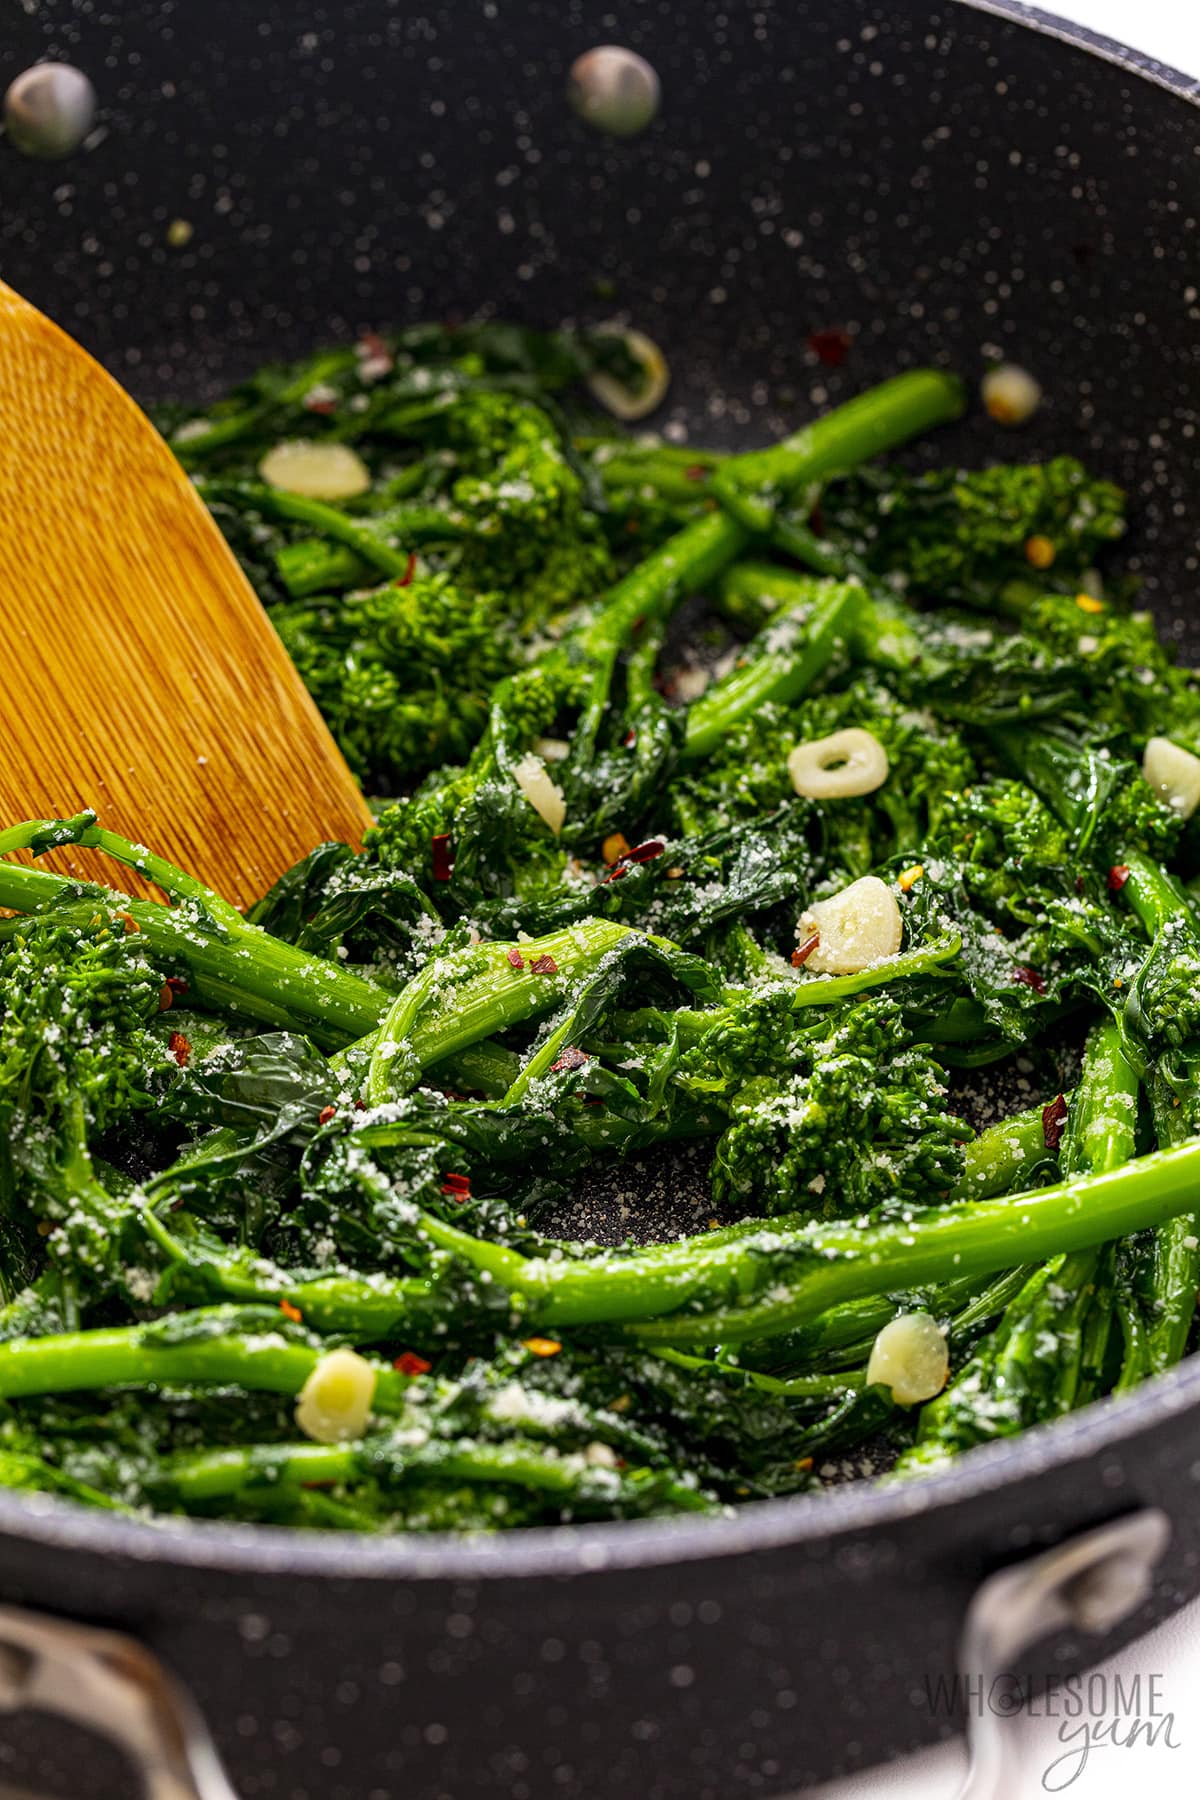 Broccoli rabe in a skillet with a wooden spoon.